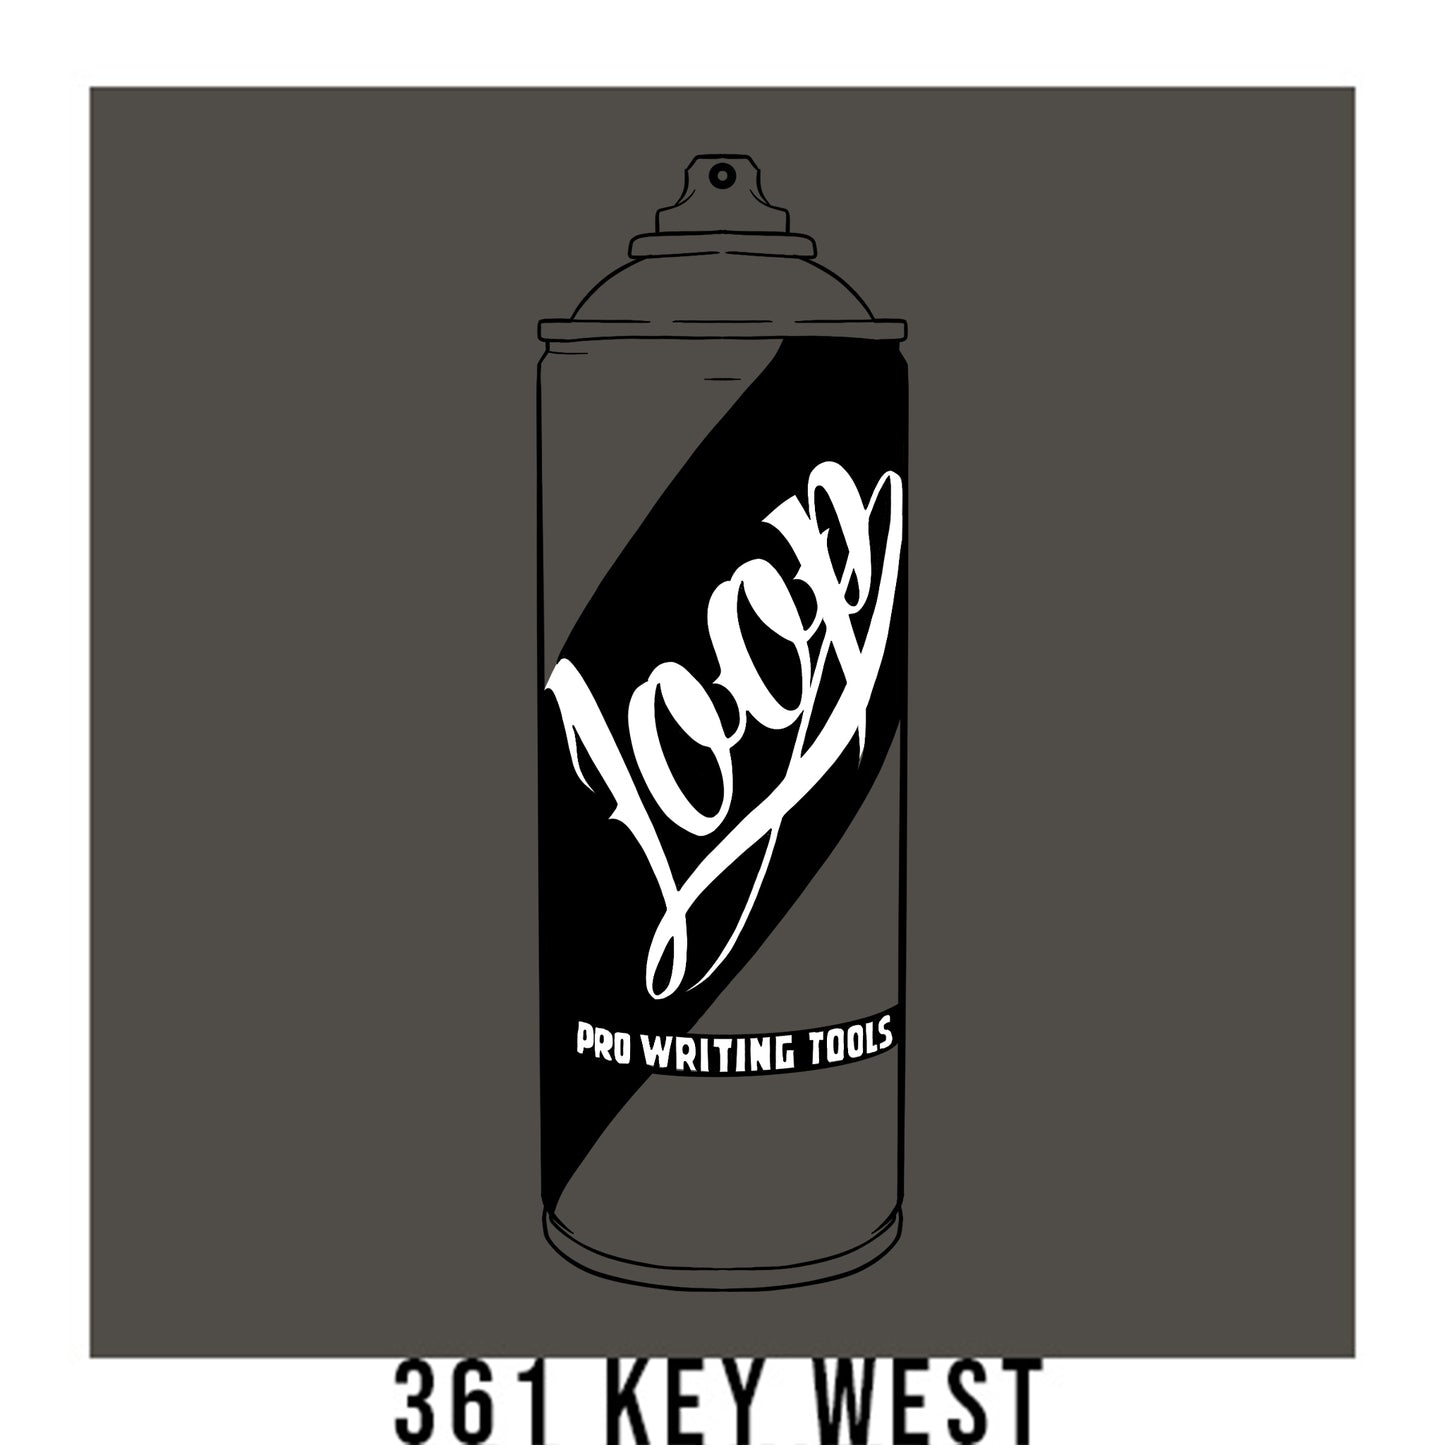 A black outline drawing of a grey spray paint can with the word "Loop" written on the face in script. The background is a color swatch of the same grey with a white border with the words "361 Key West" at the bottom.